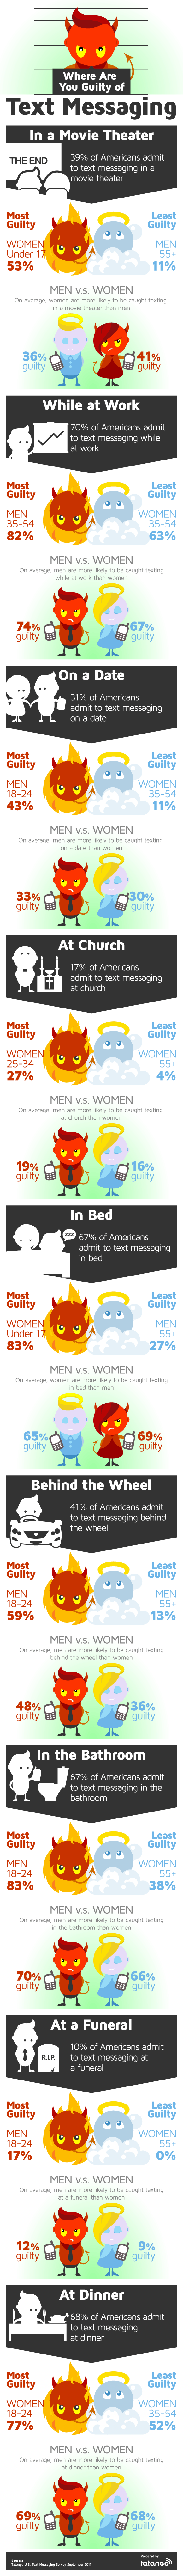 Where are you guilty of text messaging Infographic